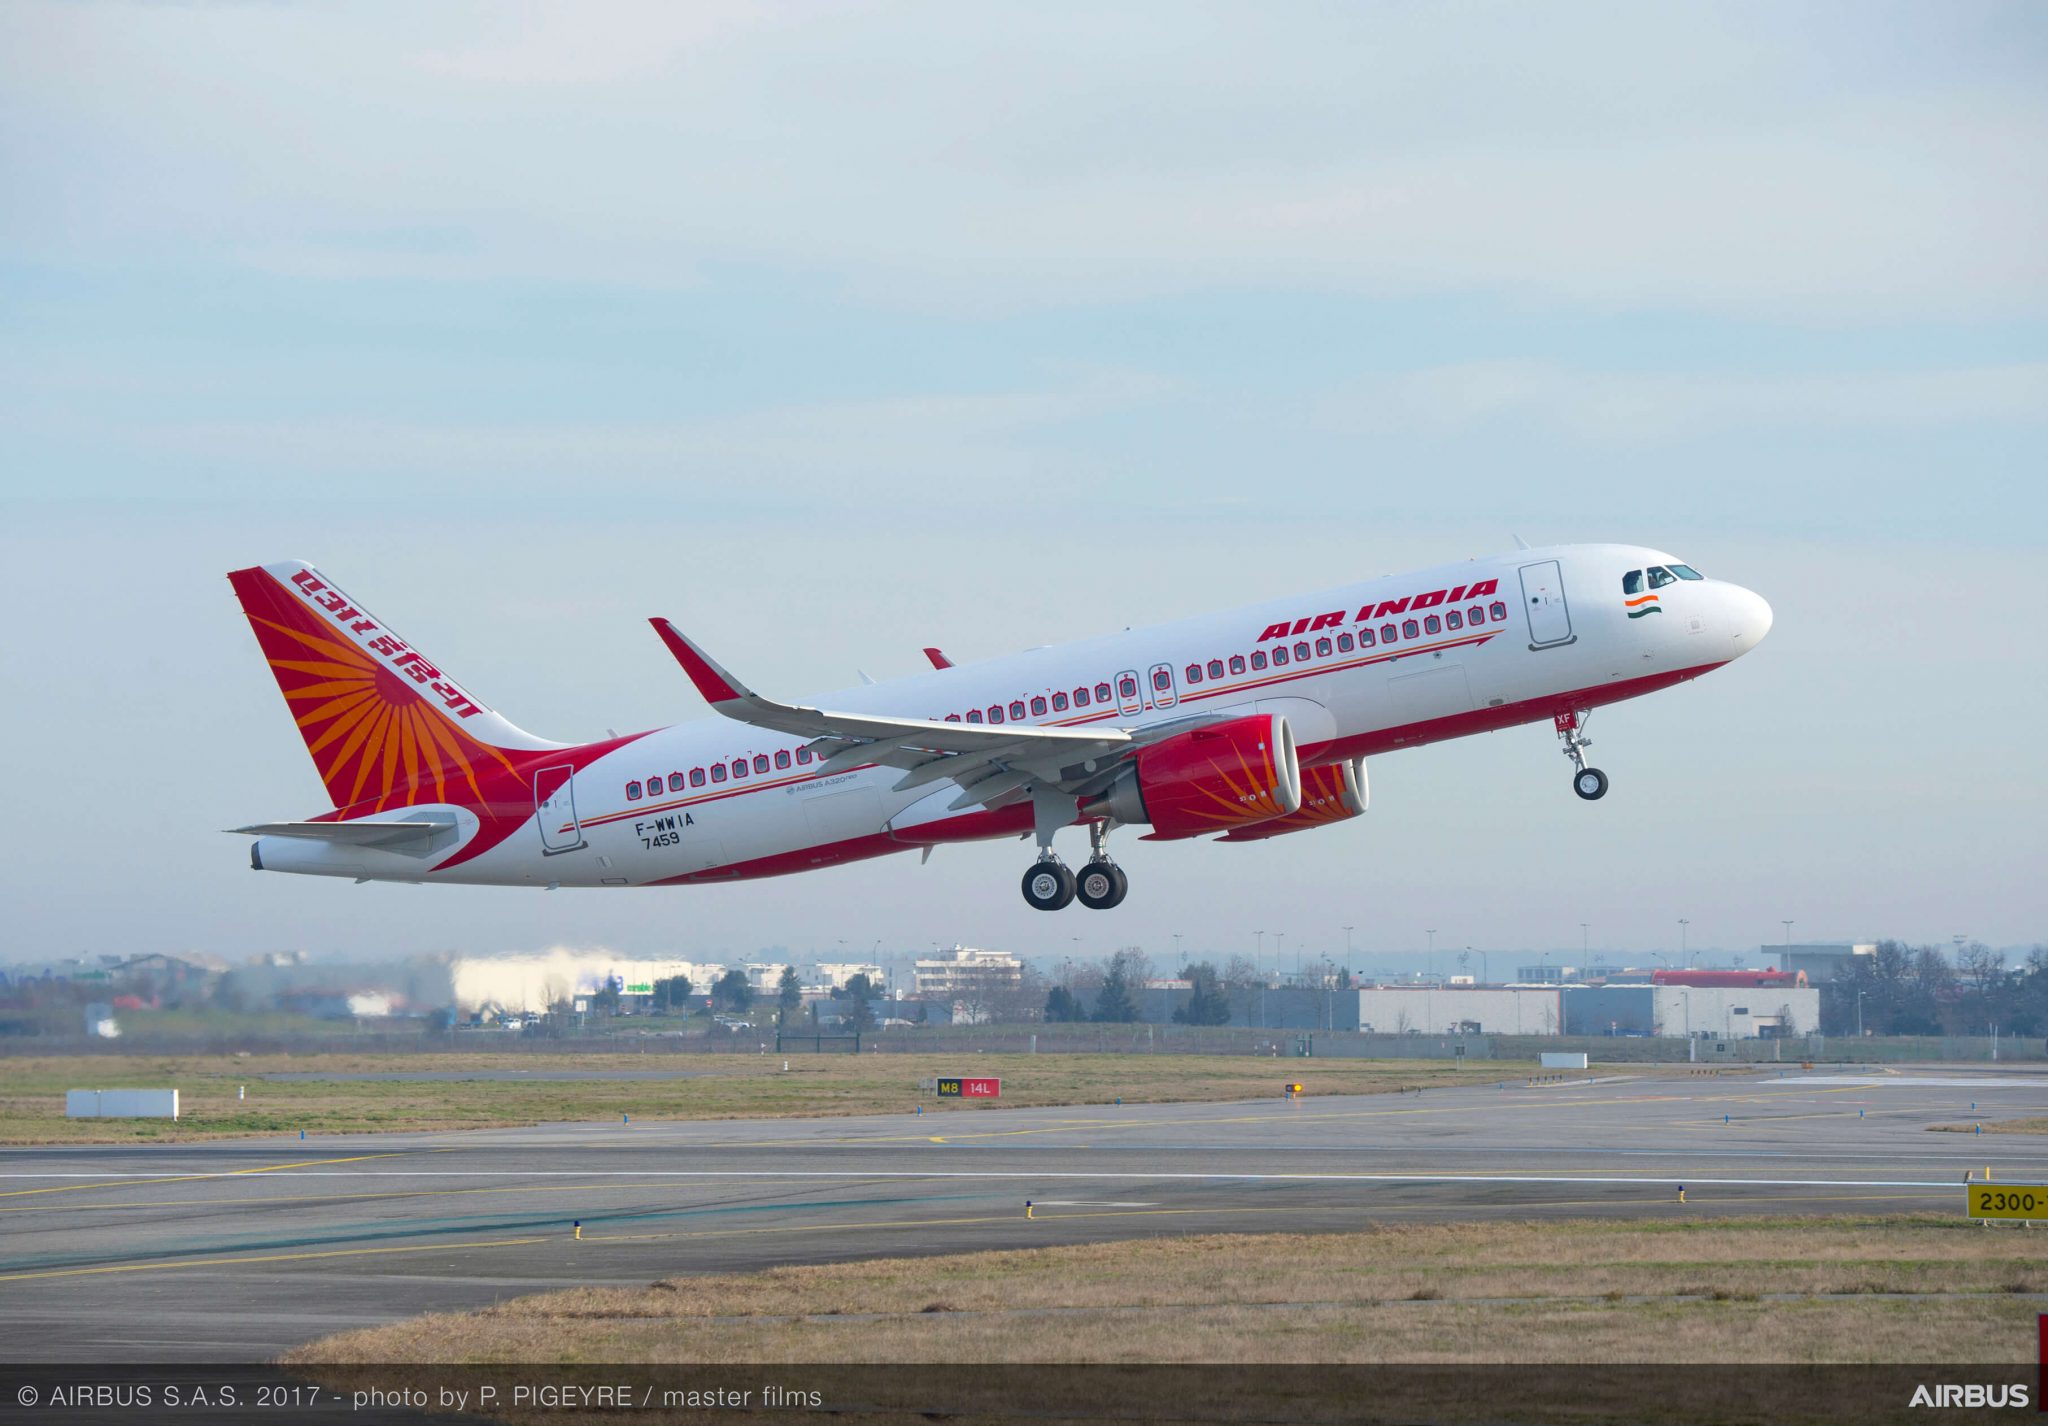 Capital injection for Air India